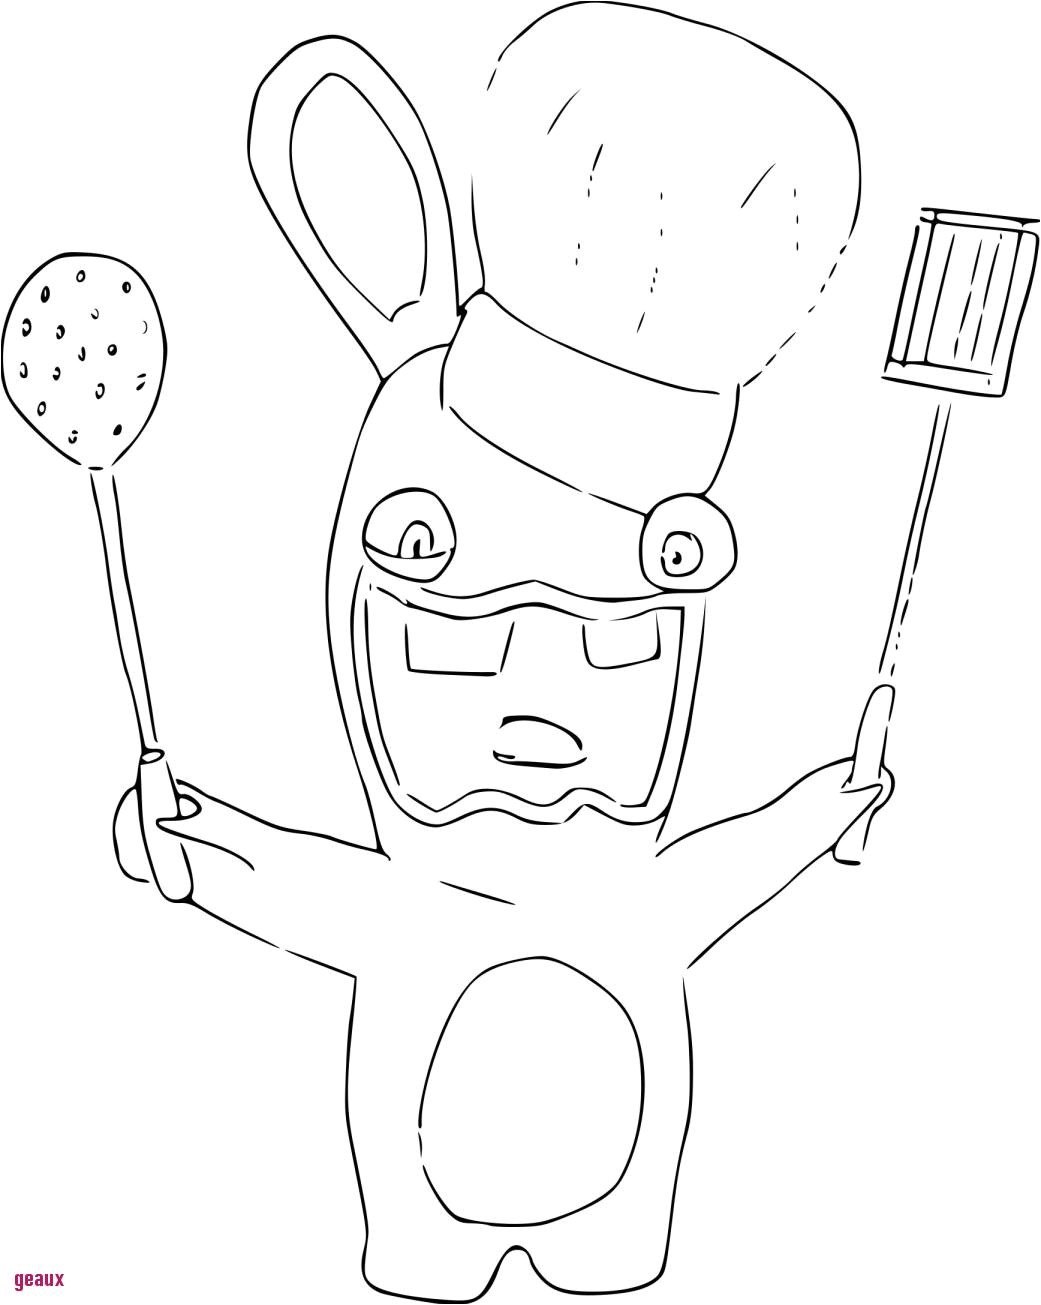 Coloriage Pierre Lapin  Imprimer Fascinant Image Coloriage Pierre Lapin Imprimer Download Coloriage En Ligne Gratuit